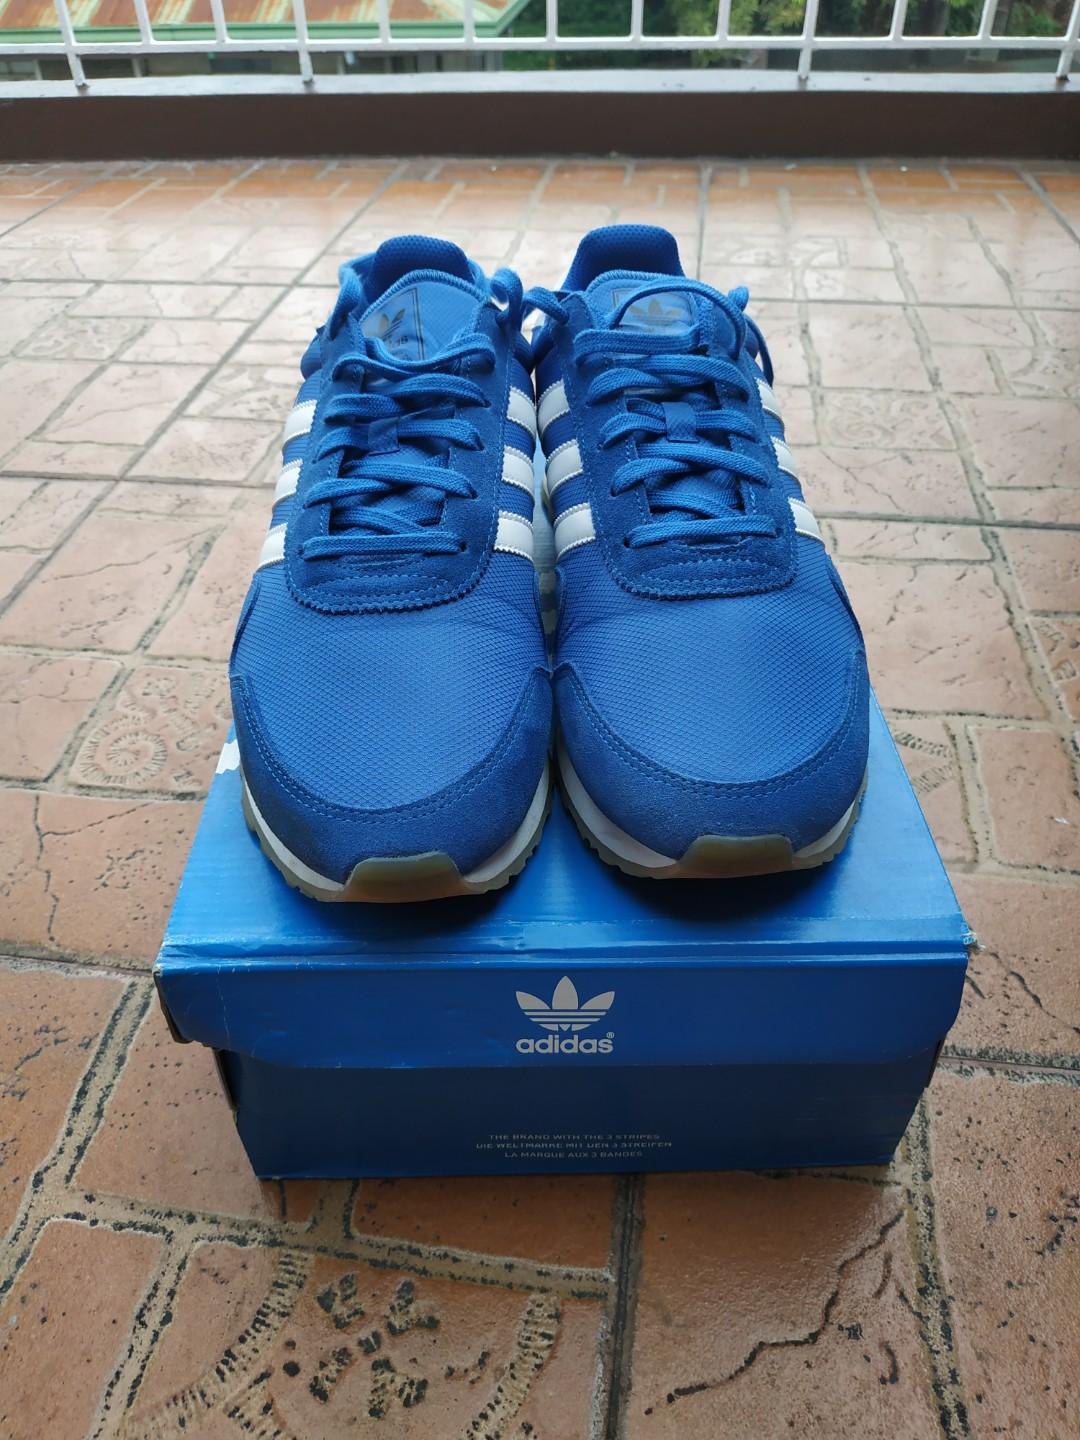 adidas haven size 10